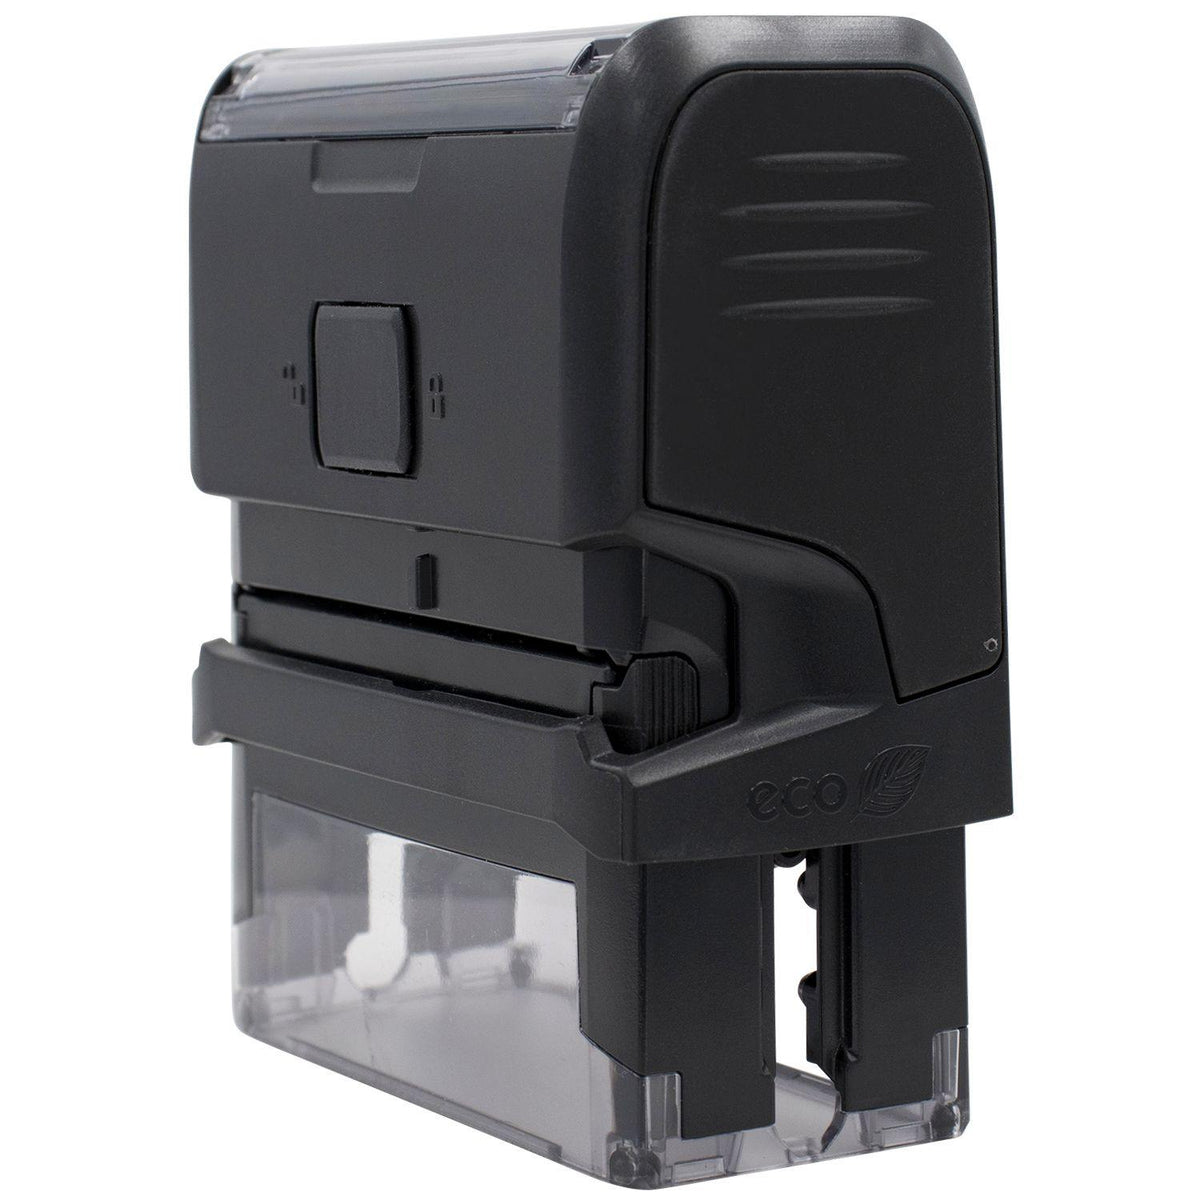 Large Self-Inking Your Insurance has Paid their Portion Stamp - Engineer Seal Stamps - Brand_Trodat, Impression Size_Large, Stamp Type_Self-Inking Stamp, Type of Use_Finance, Type of Use_Medical Office